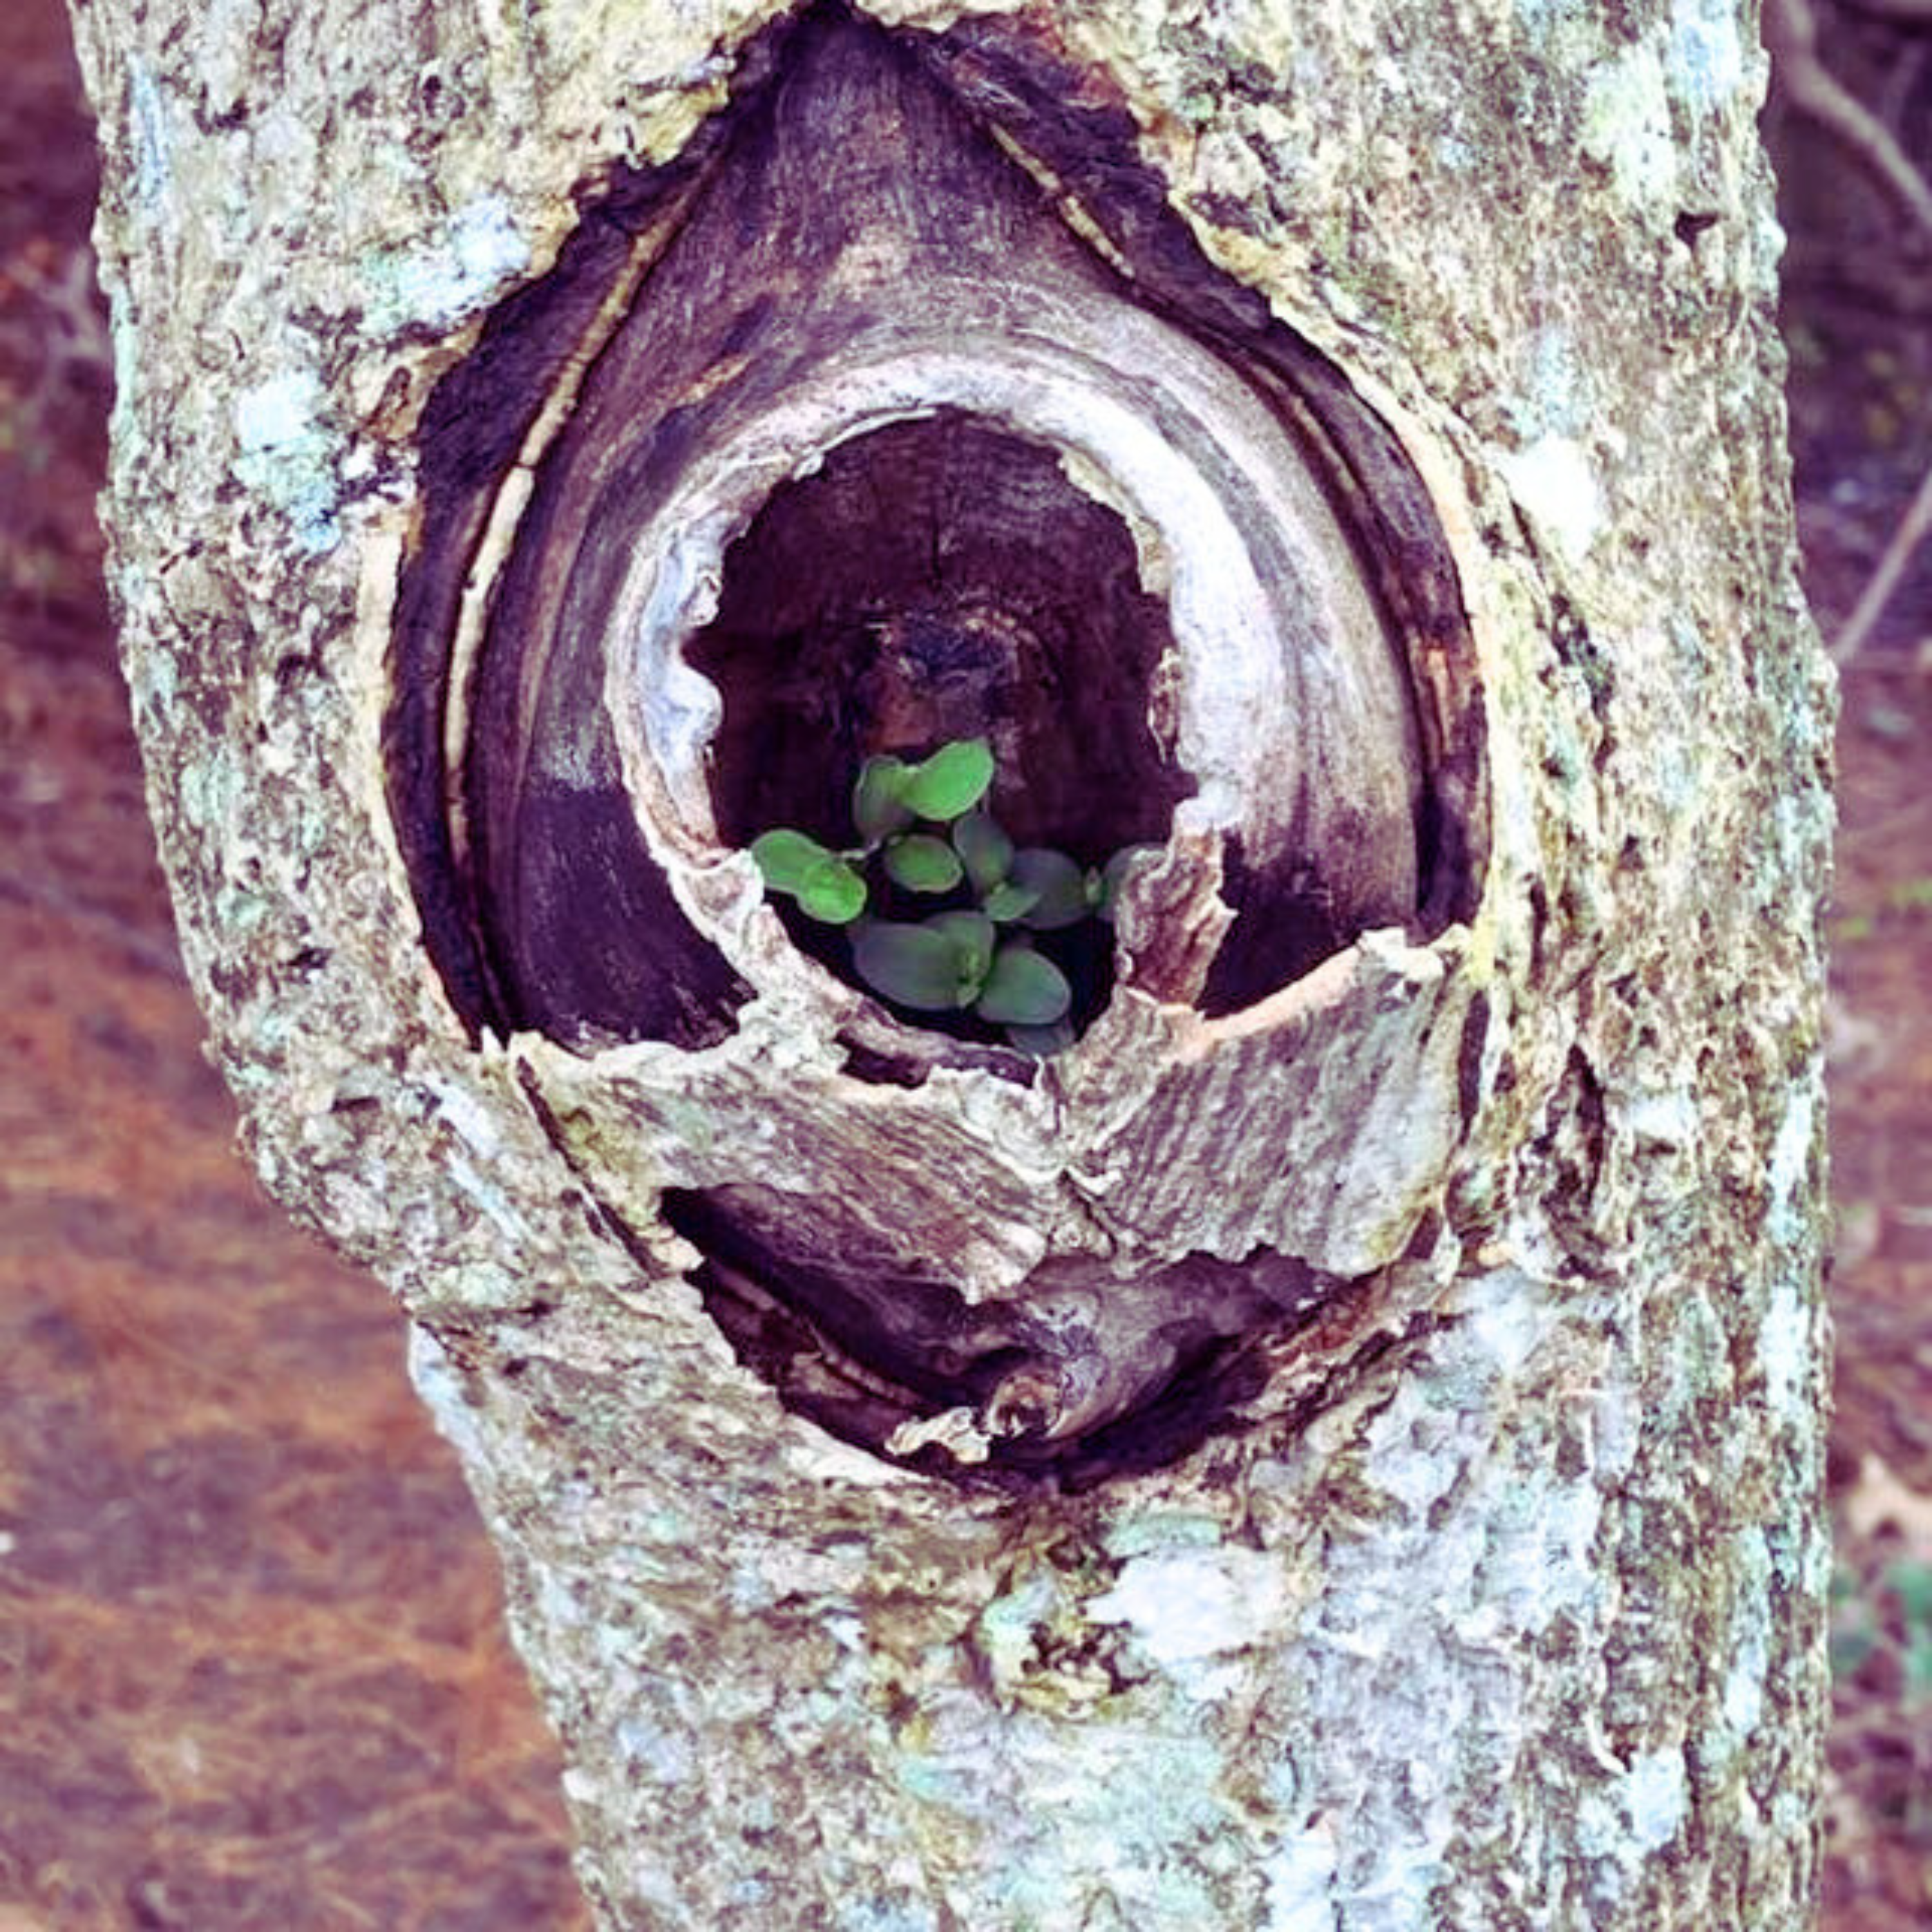 A green plant growing inside a hole within a tree's trunk.